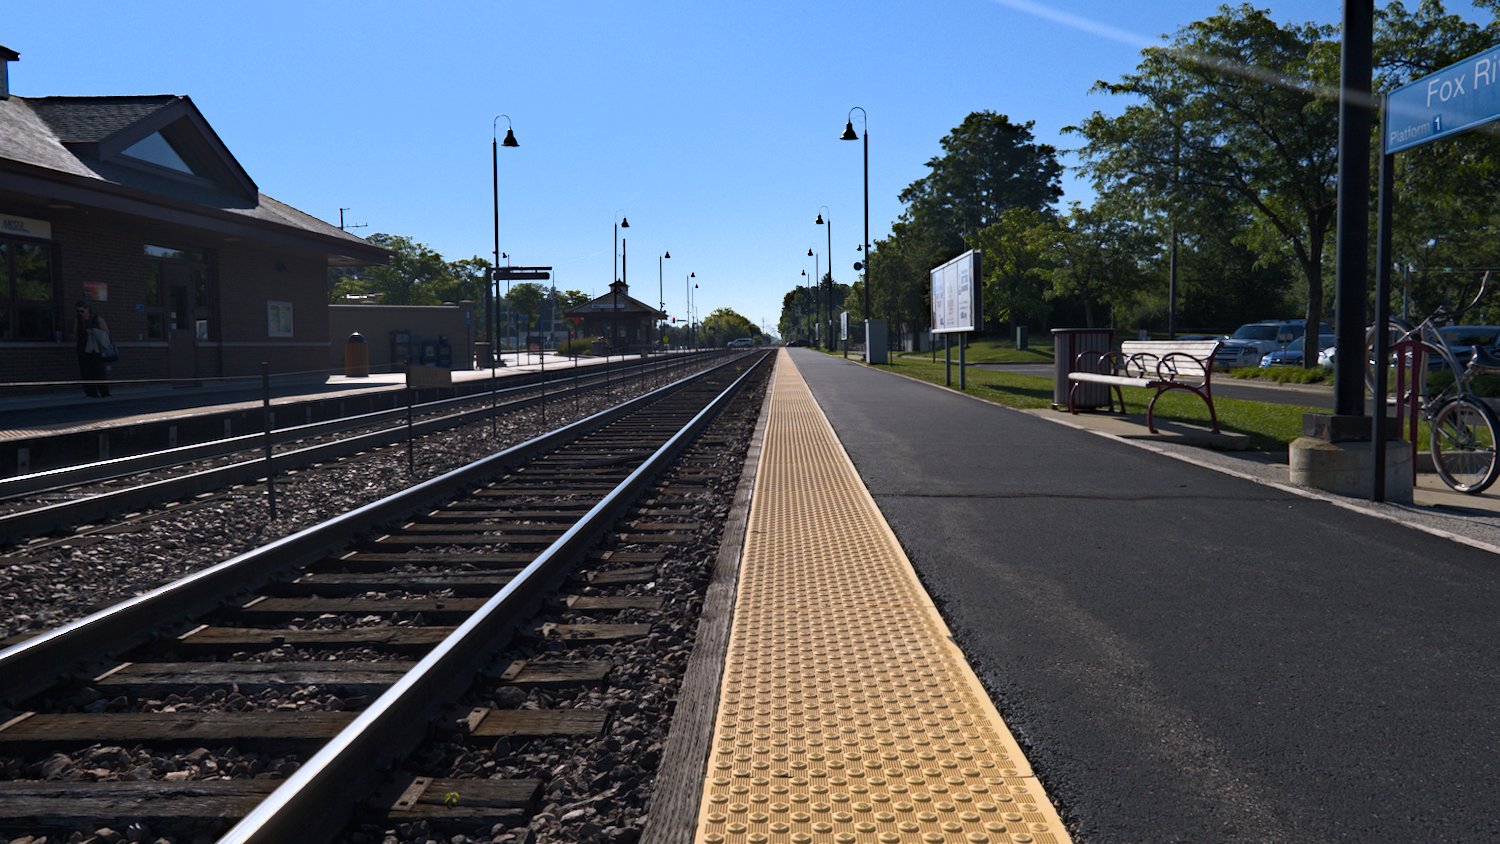 View of the tracks and platform at the Fox River Grove Metra train station.